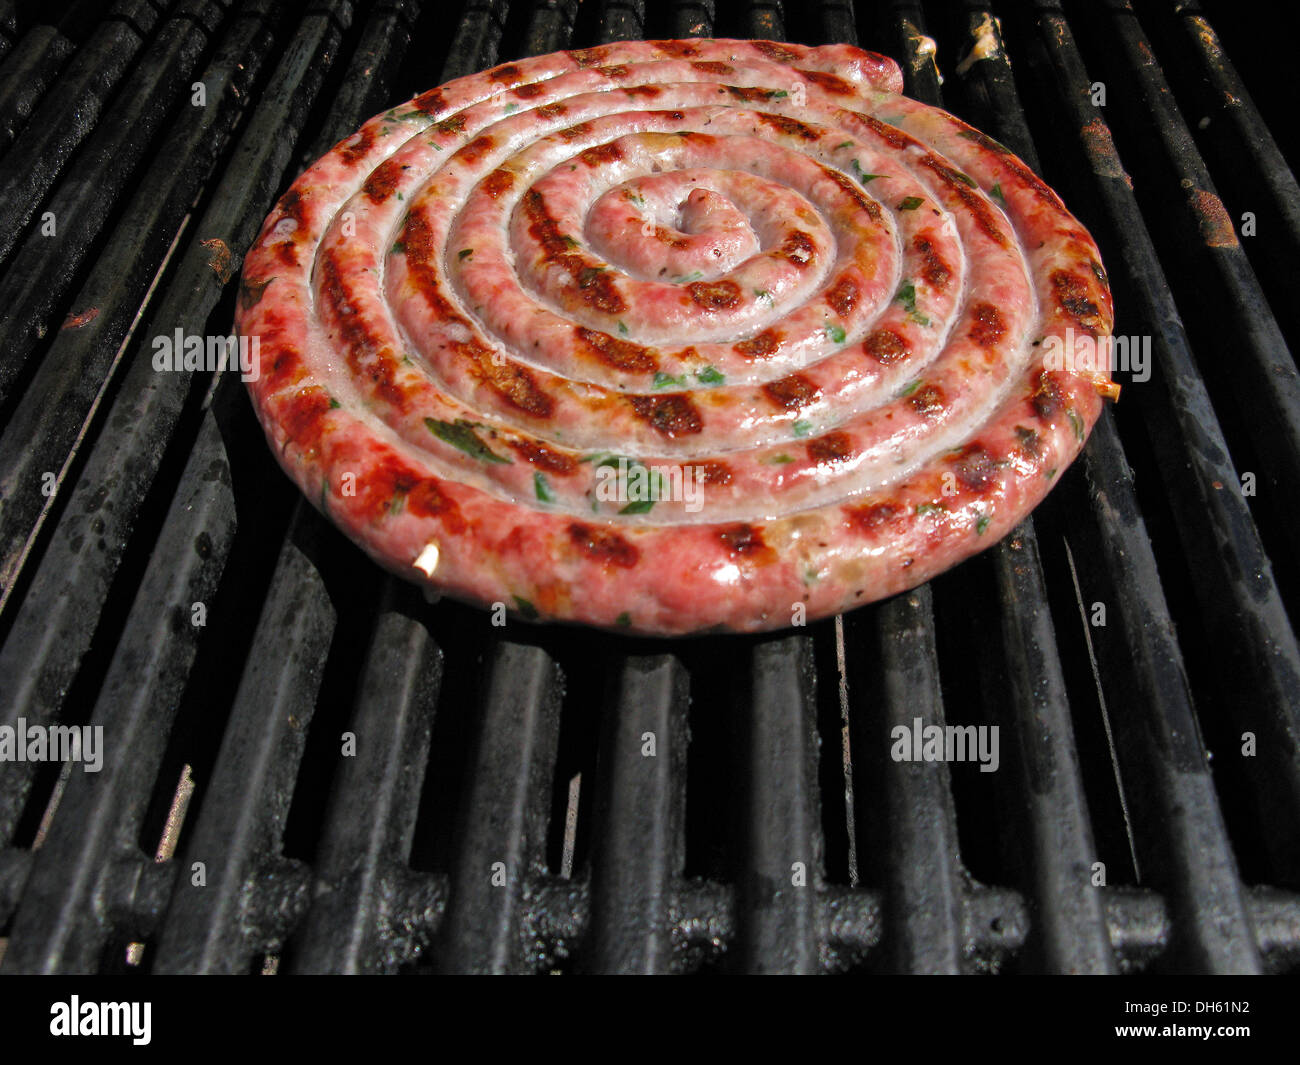 A round ring of meet sausages on a cooking grill. Stock Photo